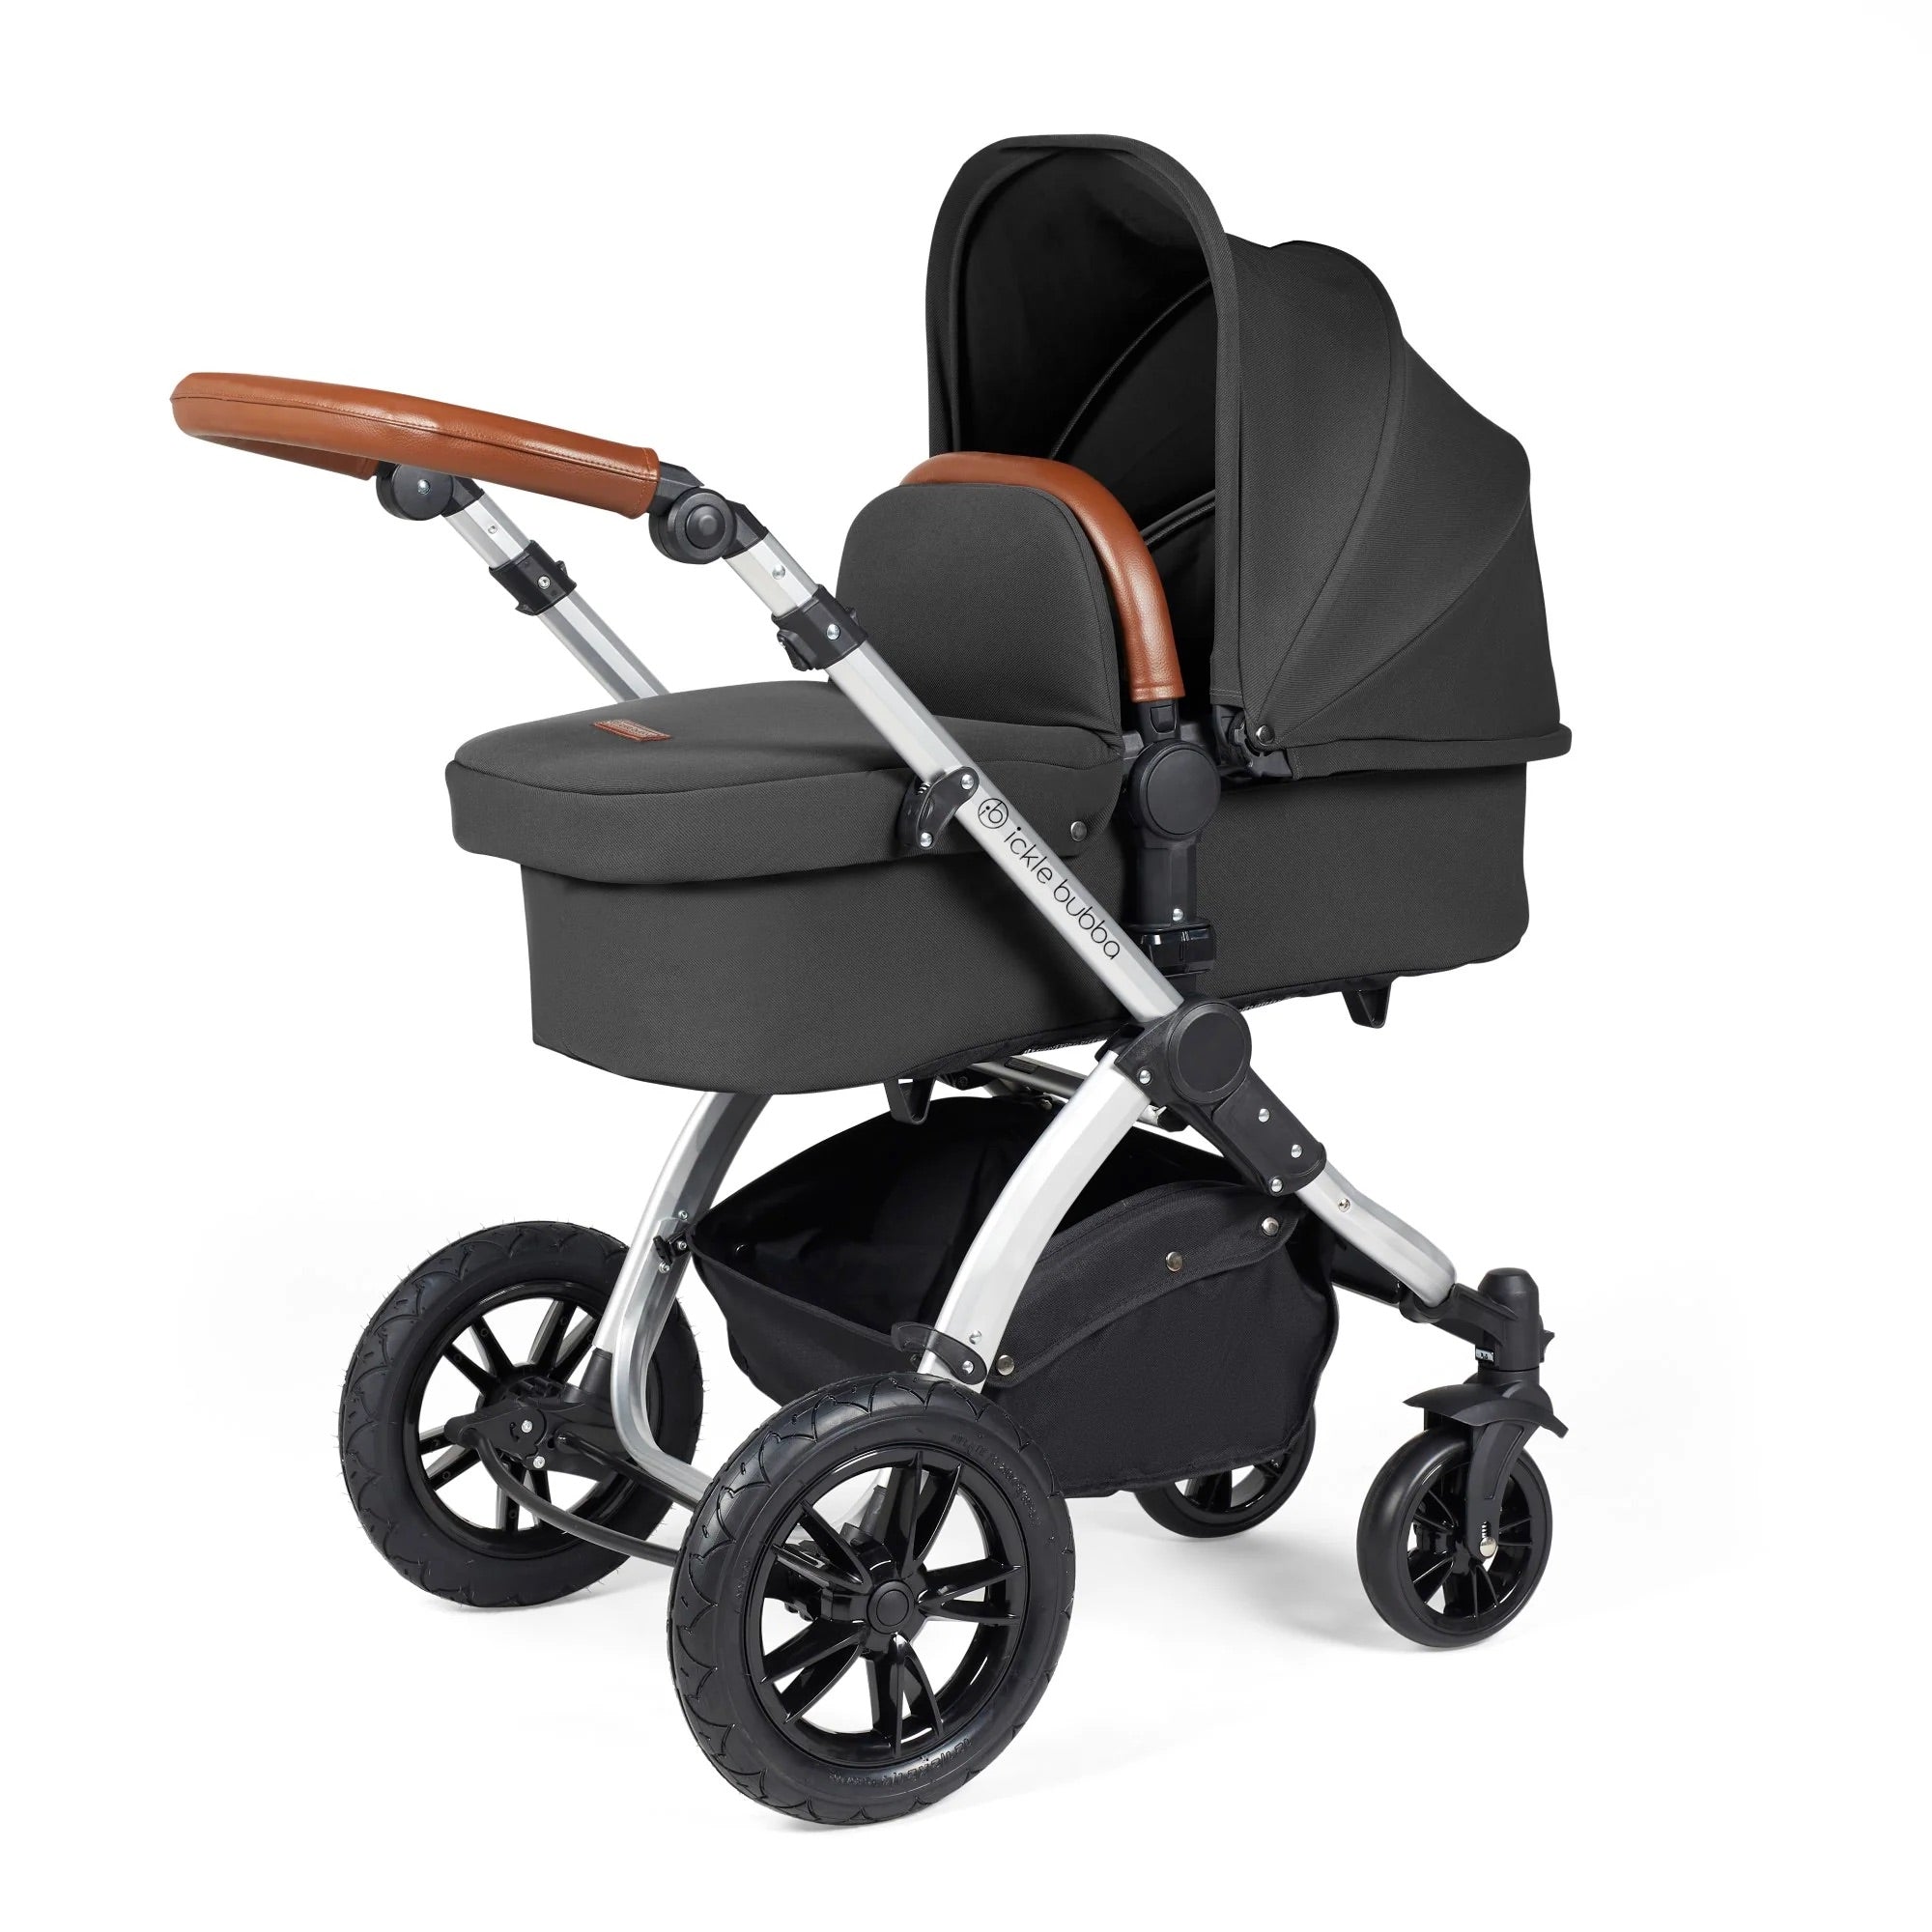 Ickle Bubba Stomp Luxe 2 in 1 Pushchair - Silver / Charcoal Grey / Tan   